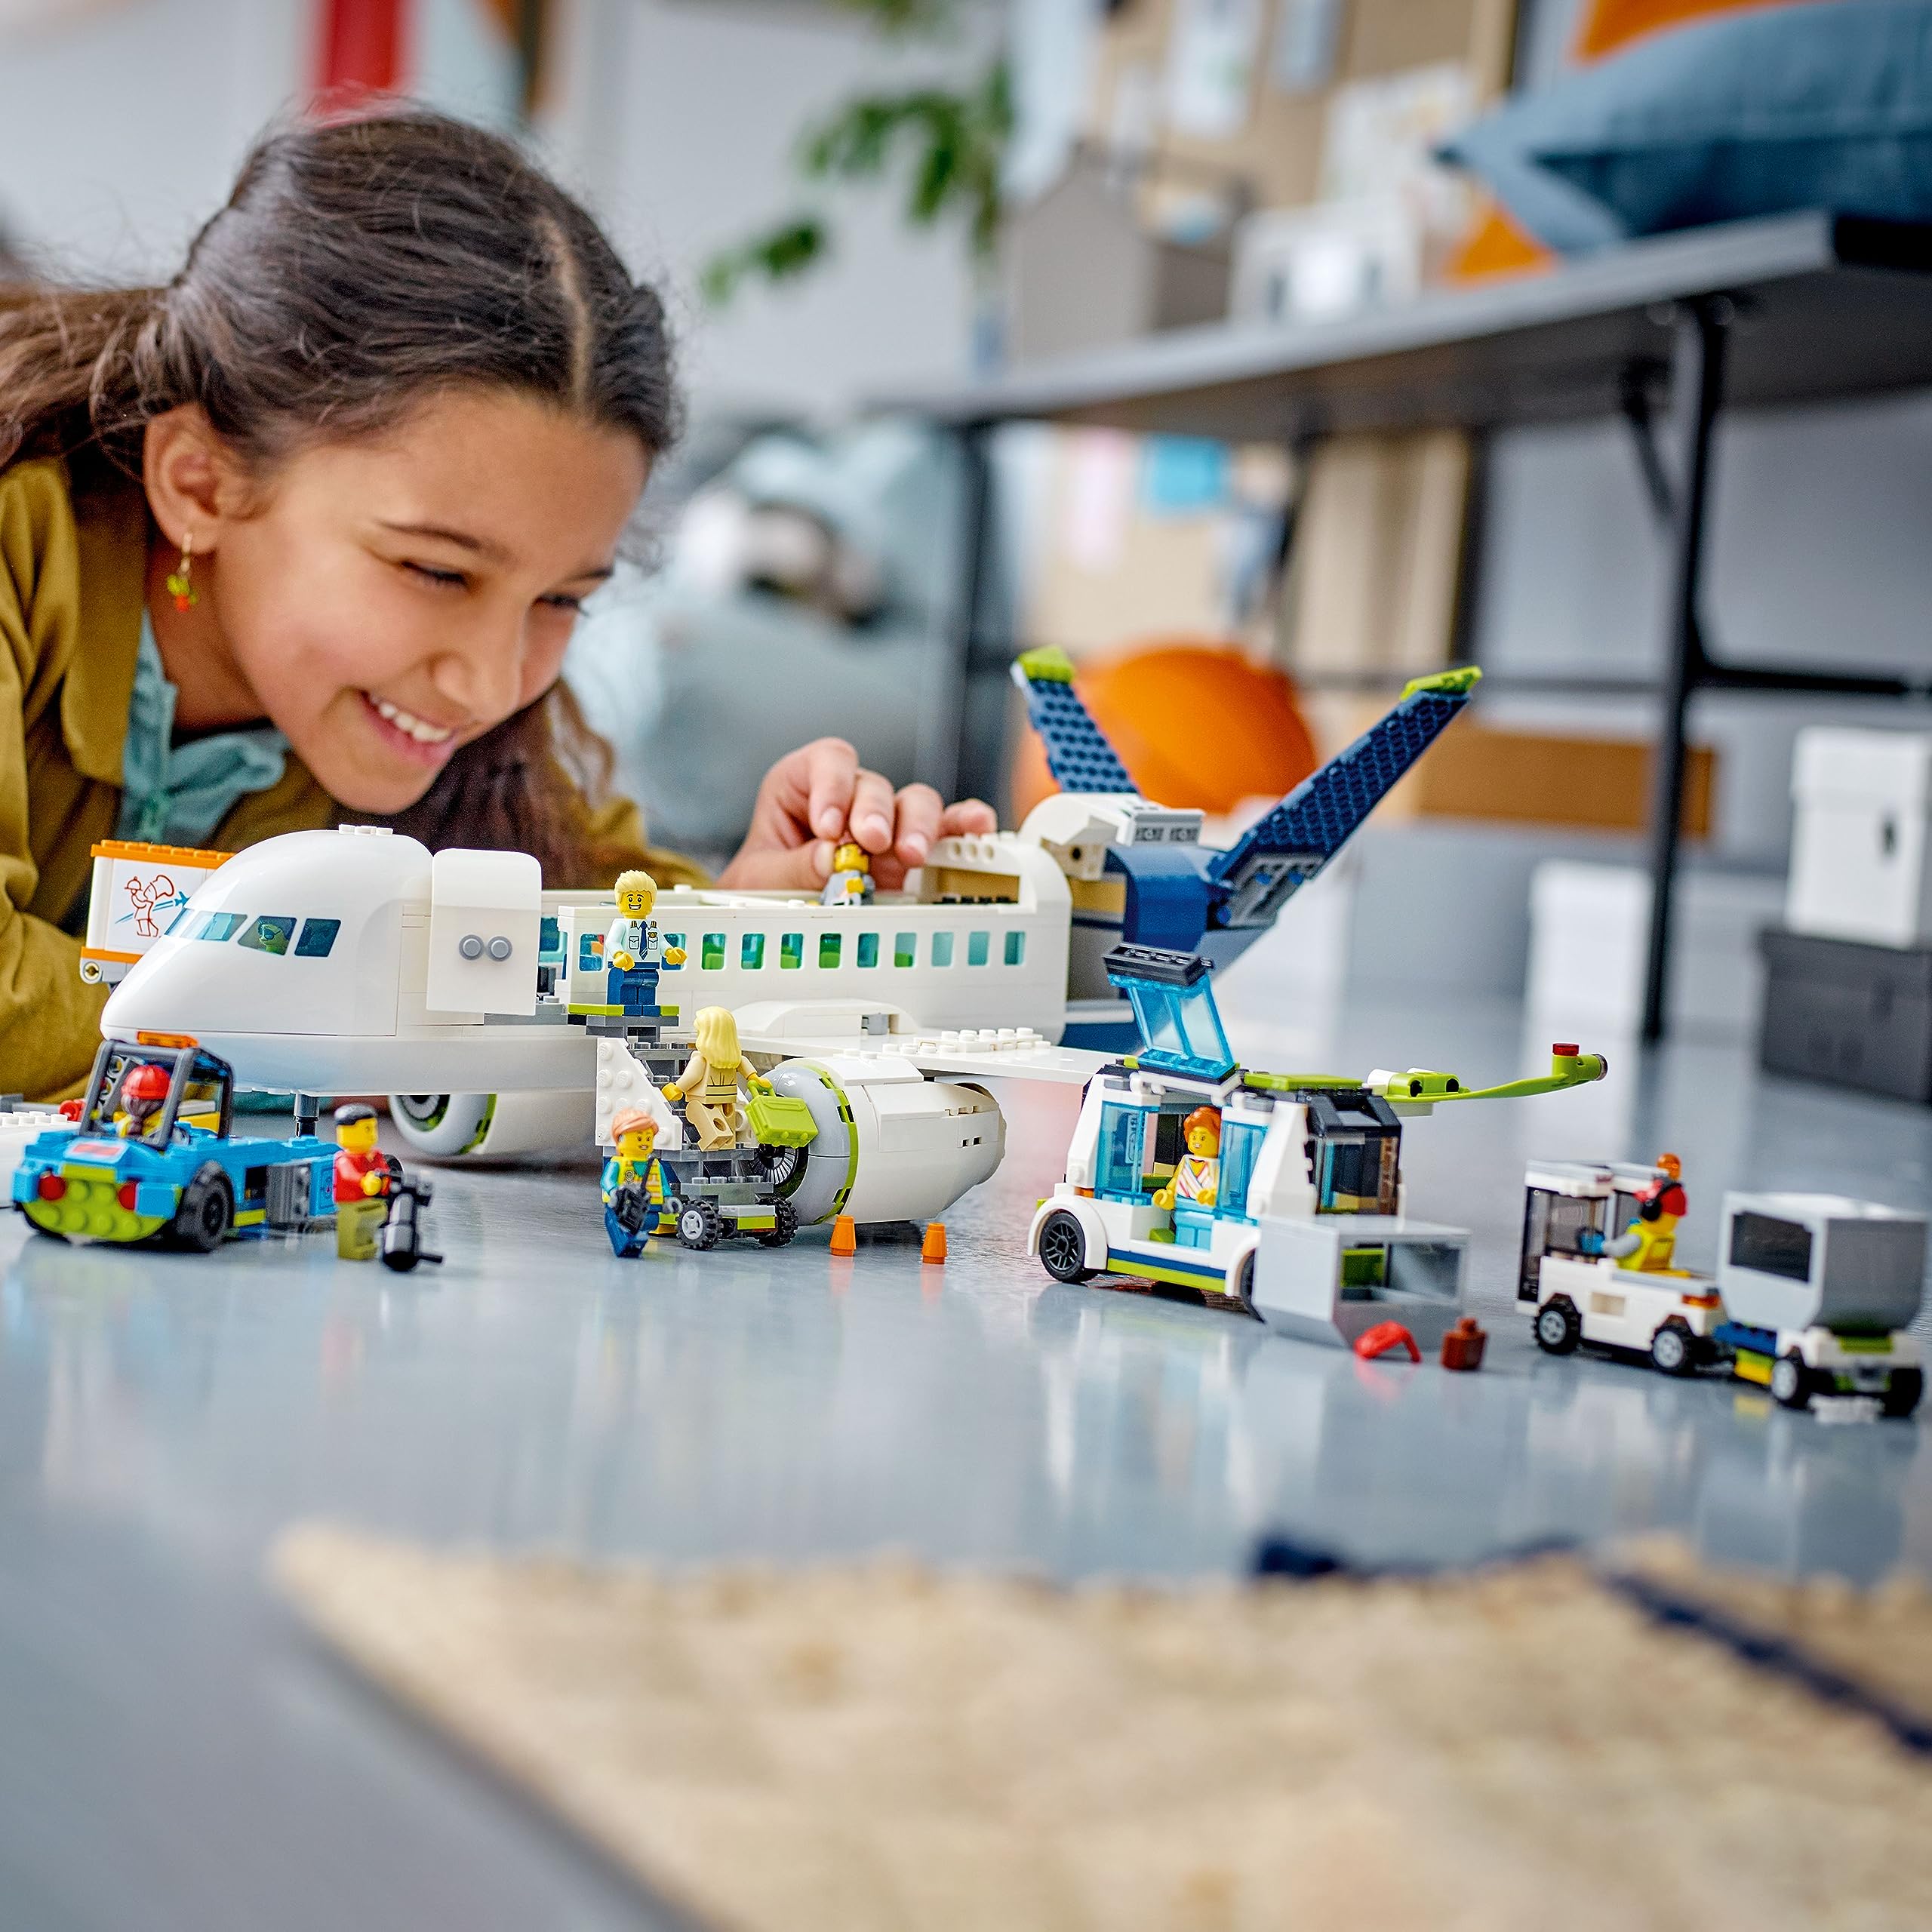 LEGO City Passenger Airplane 60367 Building Toy Set; Fun Airplane STEM Toy for Kids with a Large Airplane, Passenger Bus, Luggage Truck, Container Loader, and 9 Minifigures